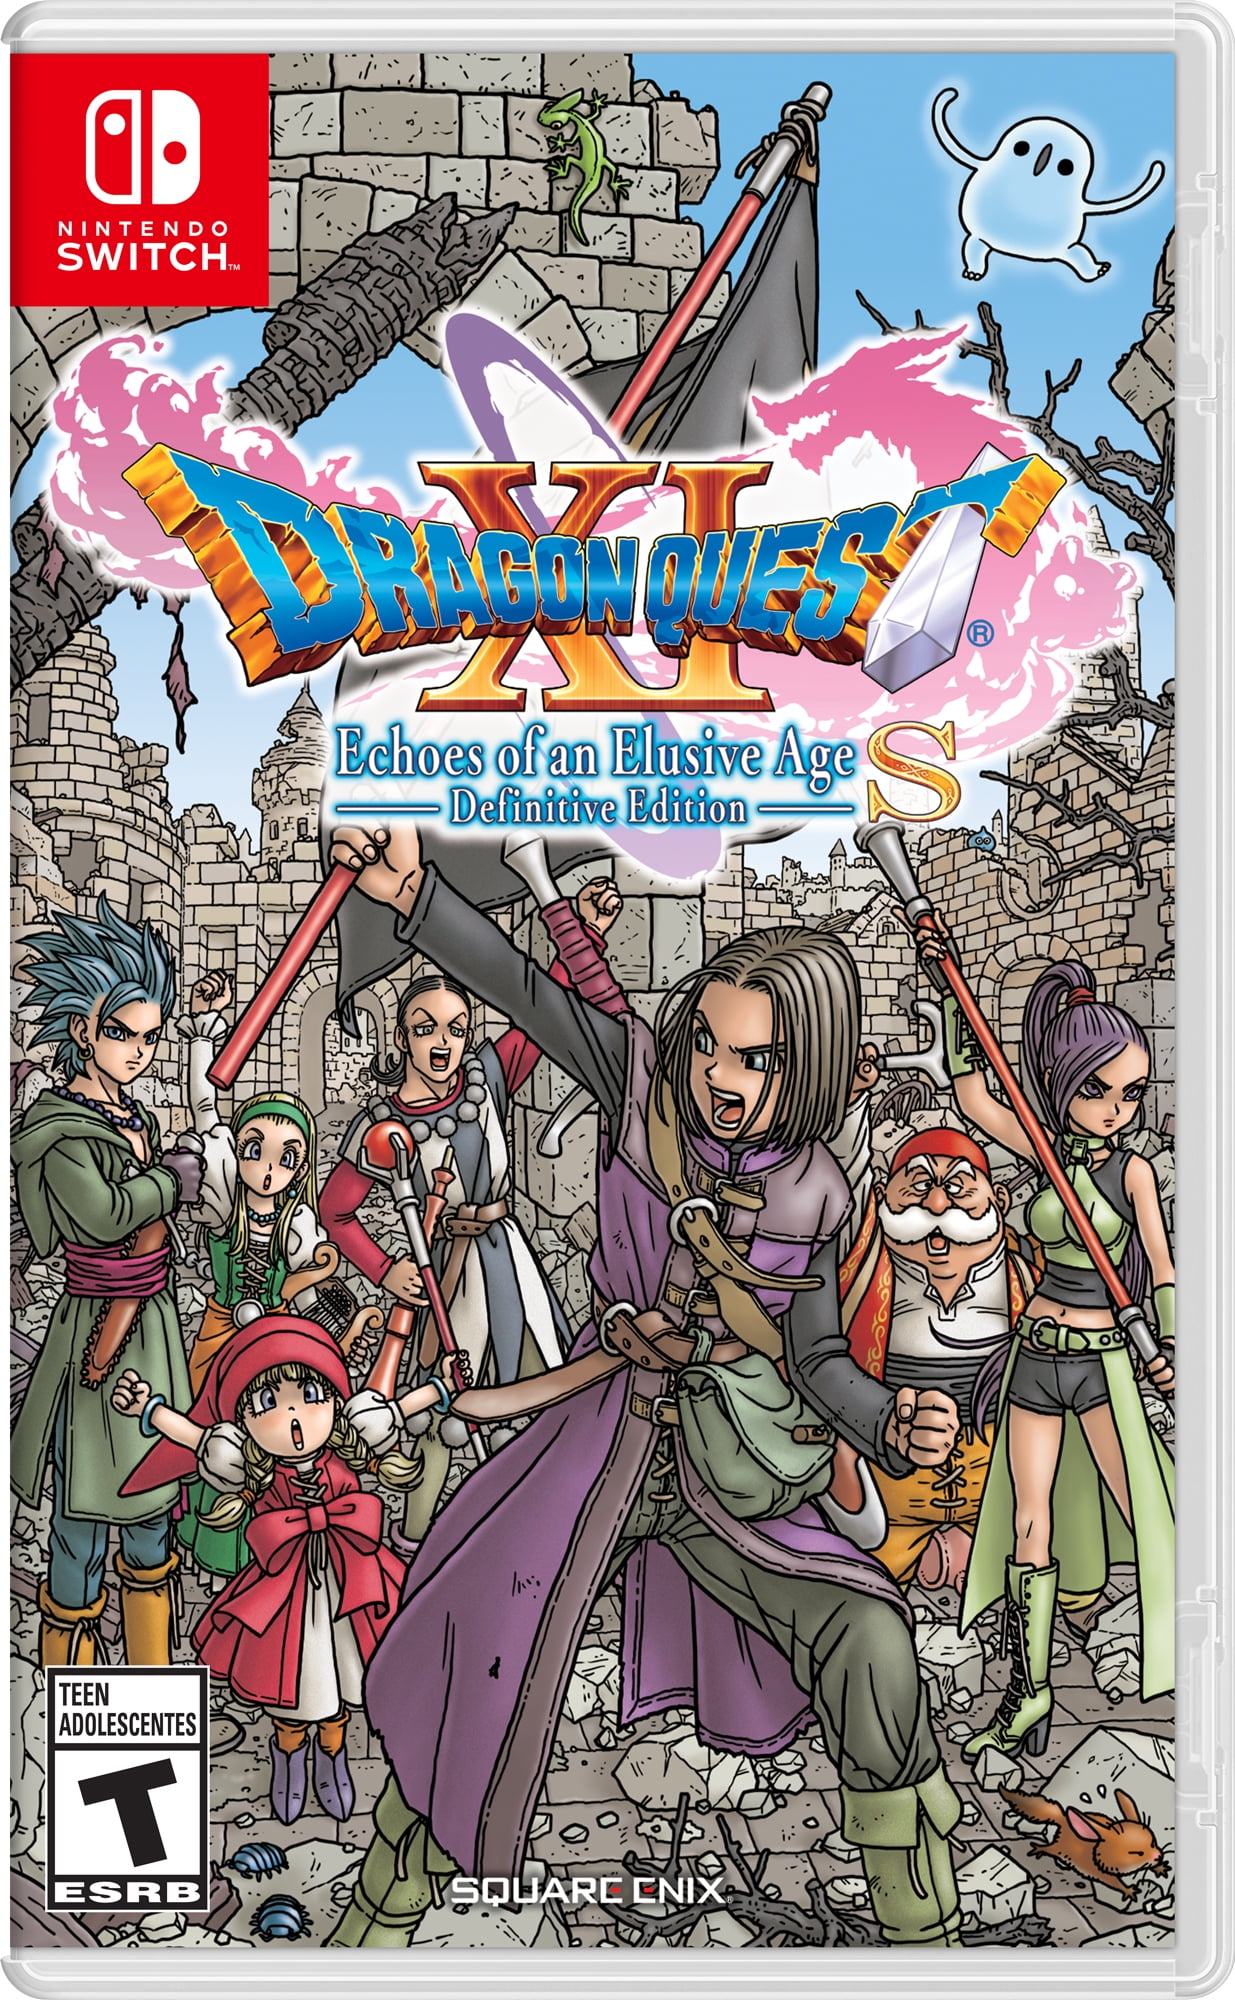 Dragon Quest Xi S Echoes Of An Elusive Age Definitive Edition Nintendo Switch Physical